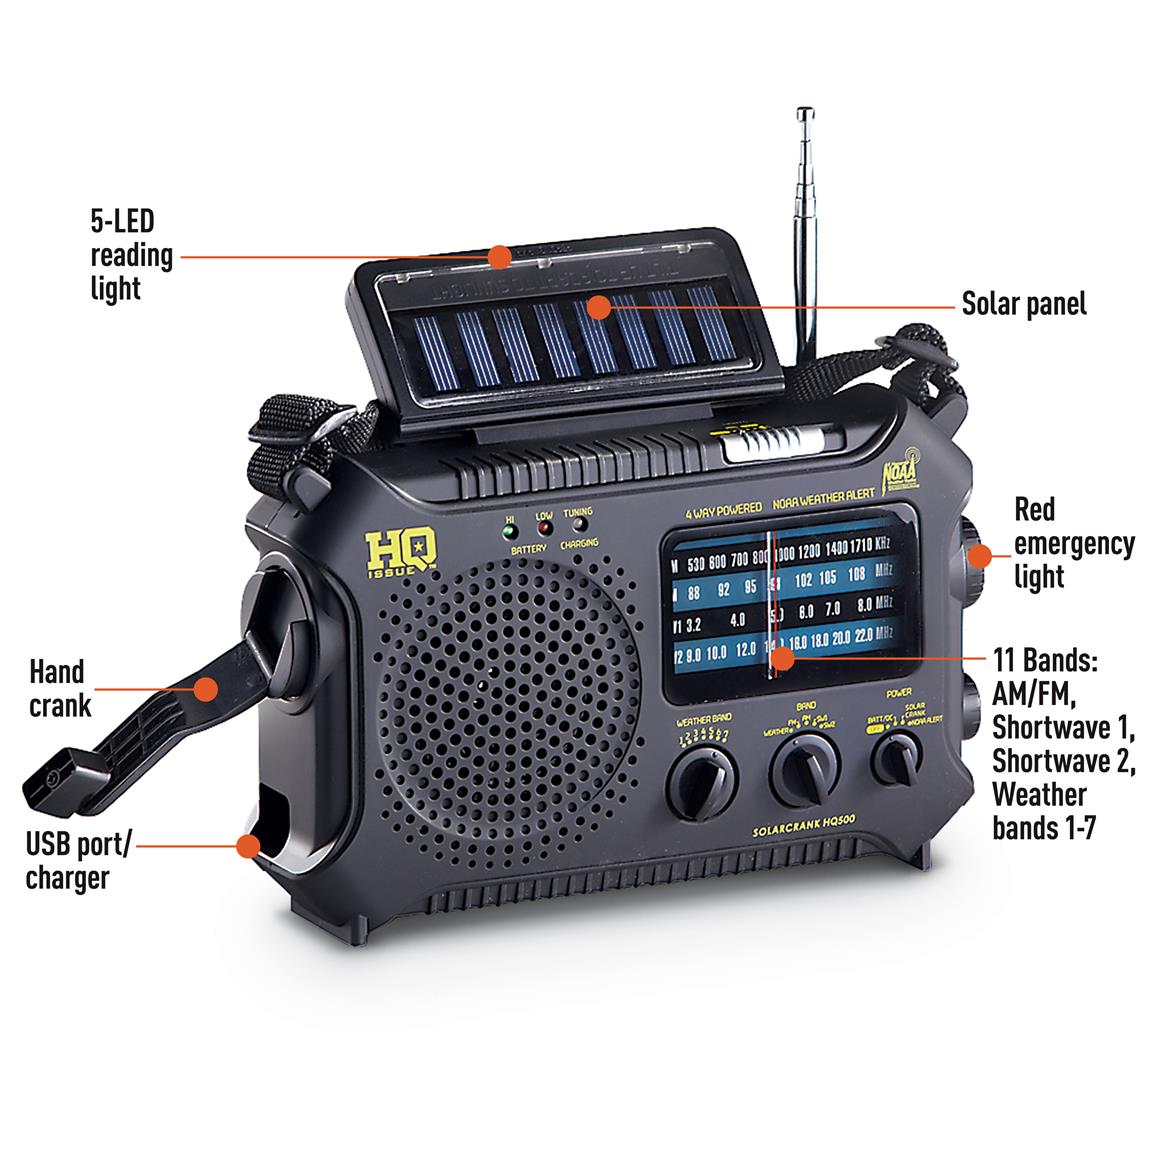 Goodwill creative wine HQ ISSUE Multi-Band Dynamo / Solar Powered Weather Radio - 232573,  Emergency & Survival at Sportsman's Guide